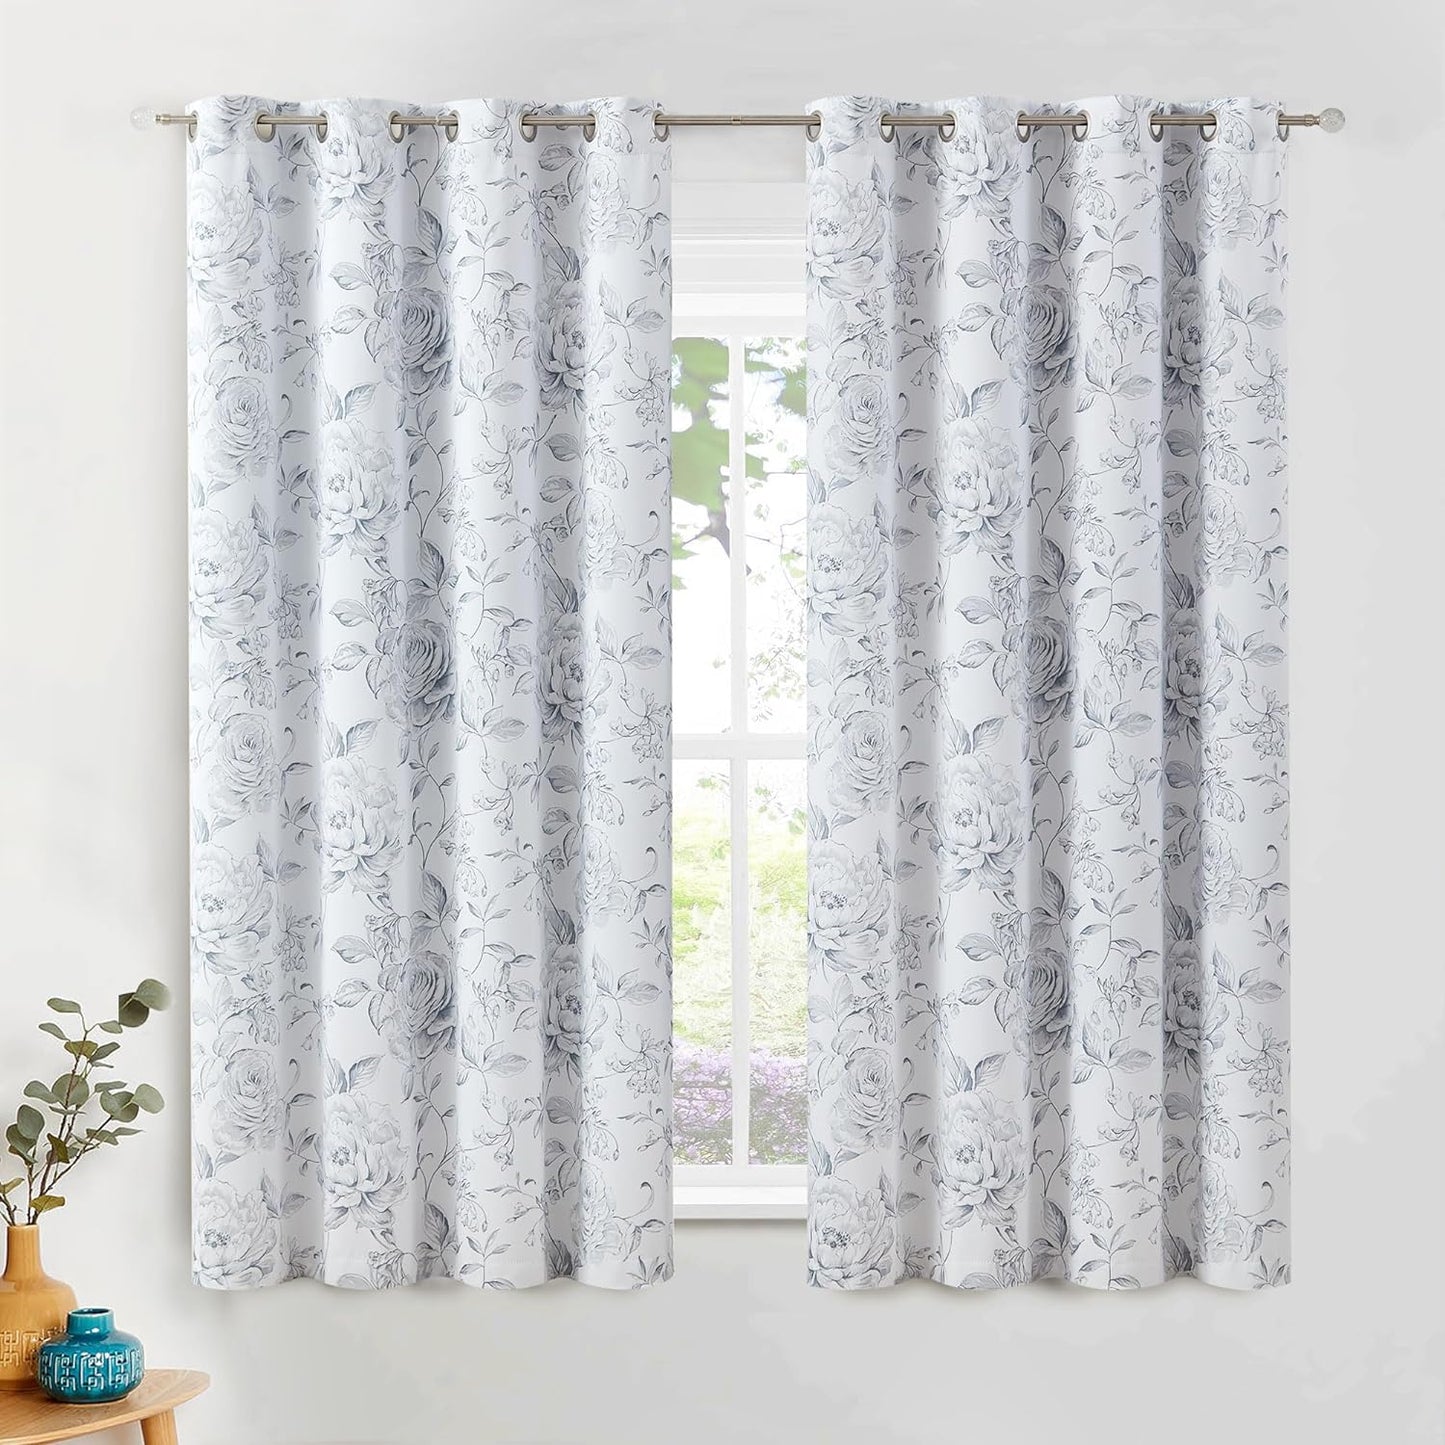 Beauoop Full Blackout Window Curtain Panels Floral Botanical Print Room Darkening Thermal Insulated Drapes Rose Grommet Window Treatment for Bedroom Theatre Office, 52 X 63 Inch, White/Blue, 2 Panels  Beauoop Grey 50"X63"X2 